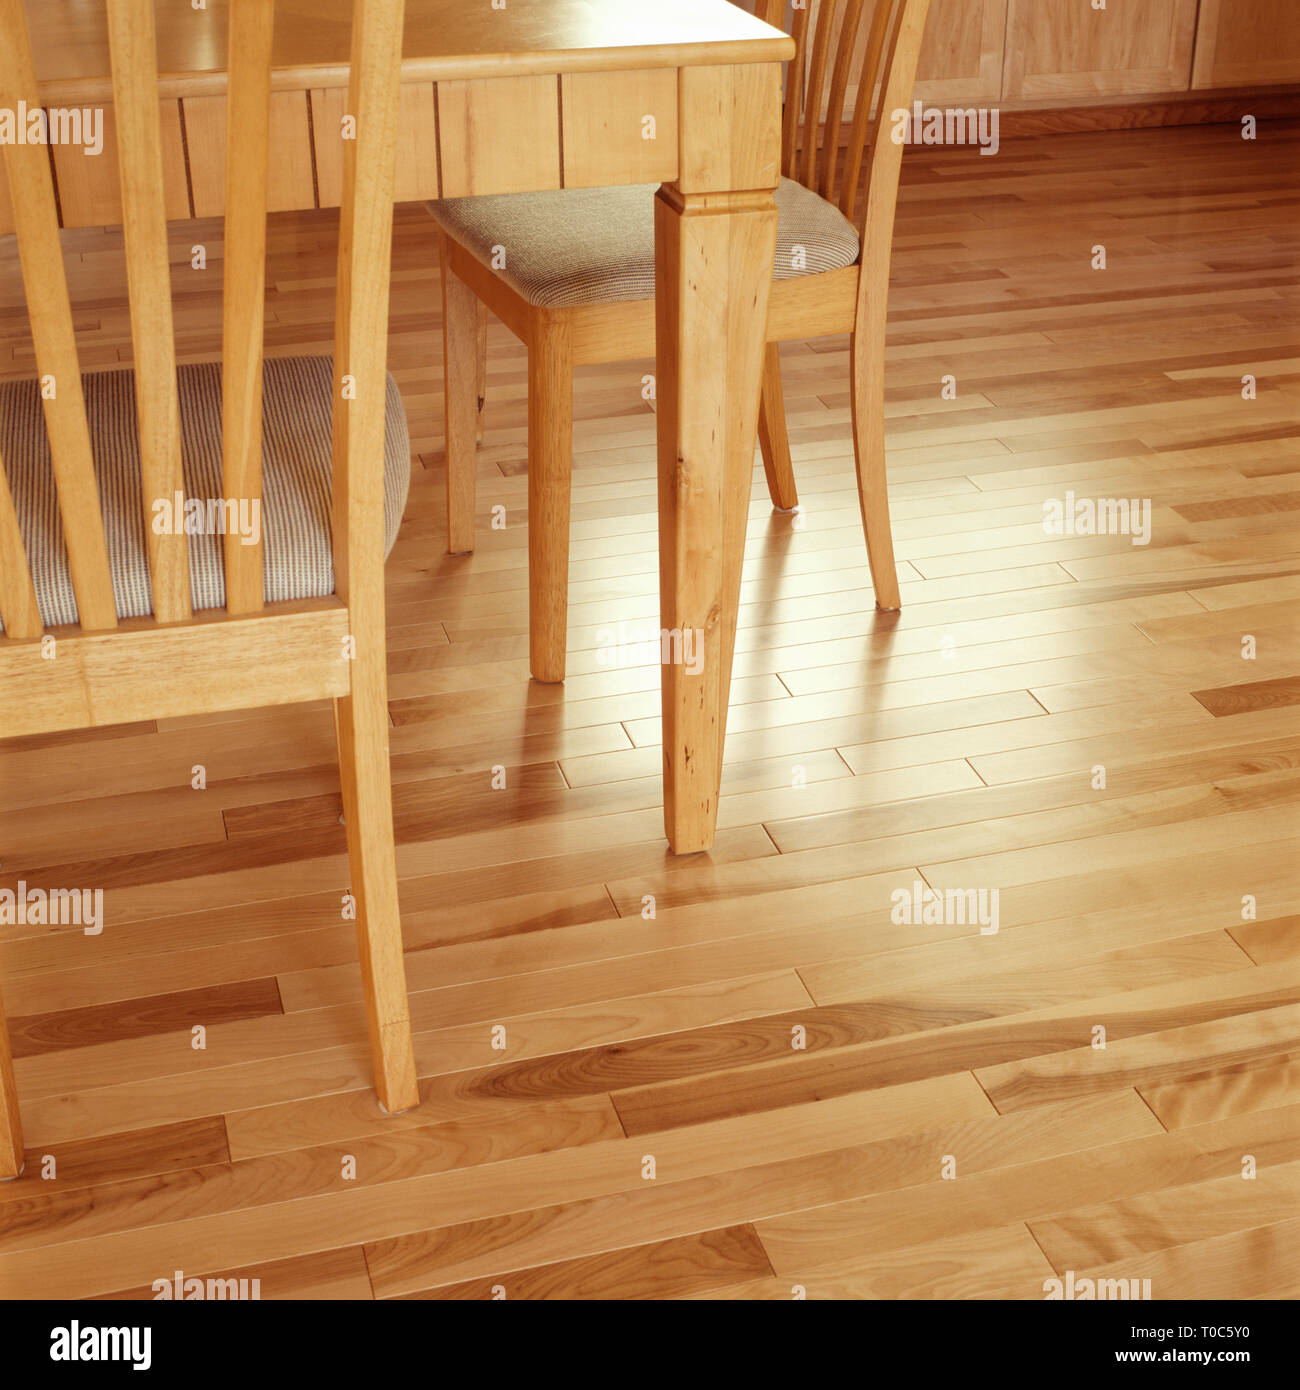 Clean, shiny, maple wood hardwood floor flooring in contemporary upscale home kitchen dining room interior Stock Photo